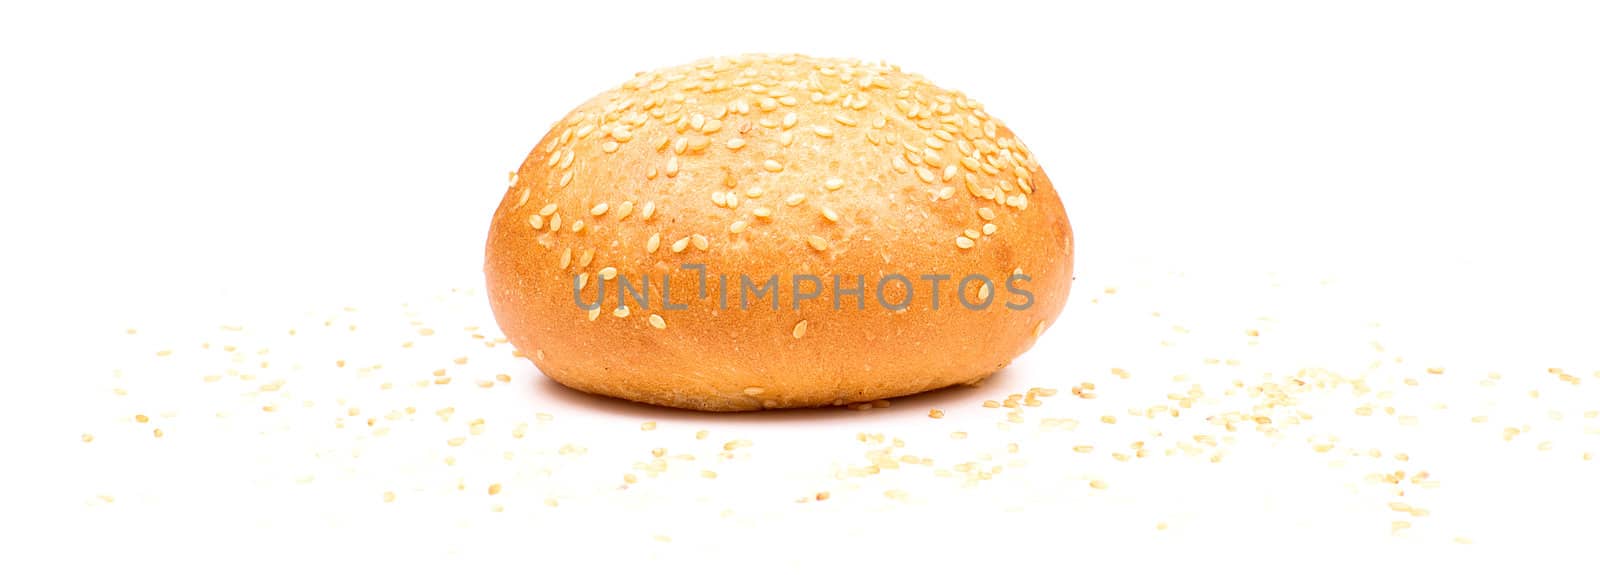 Bun with sesame isolated on the white background